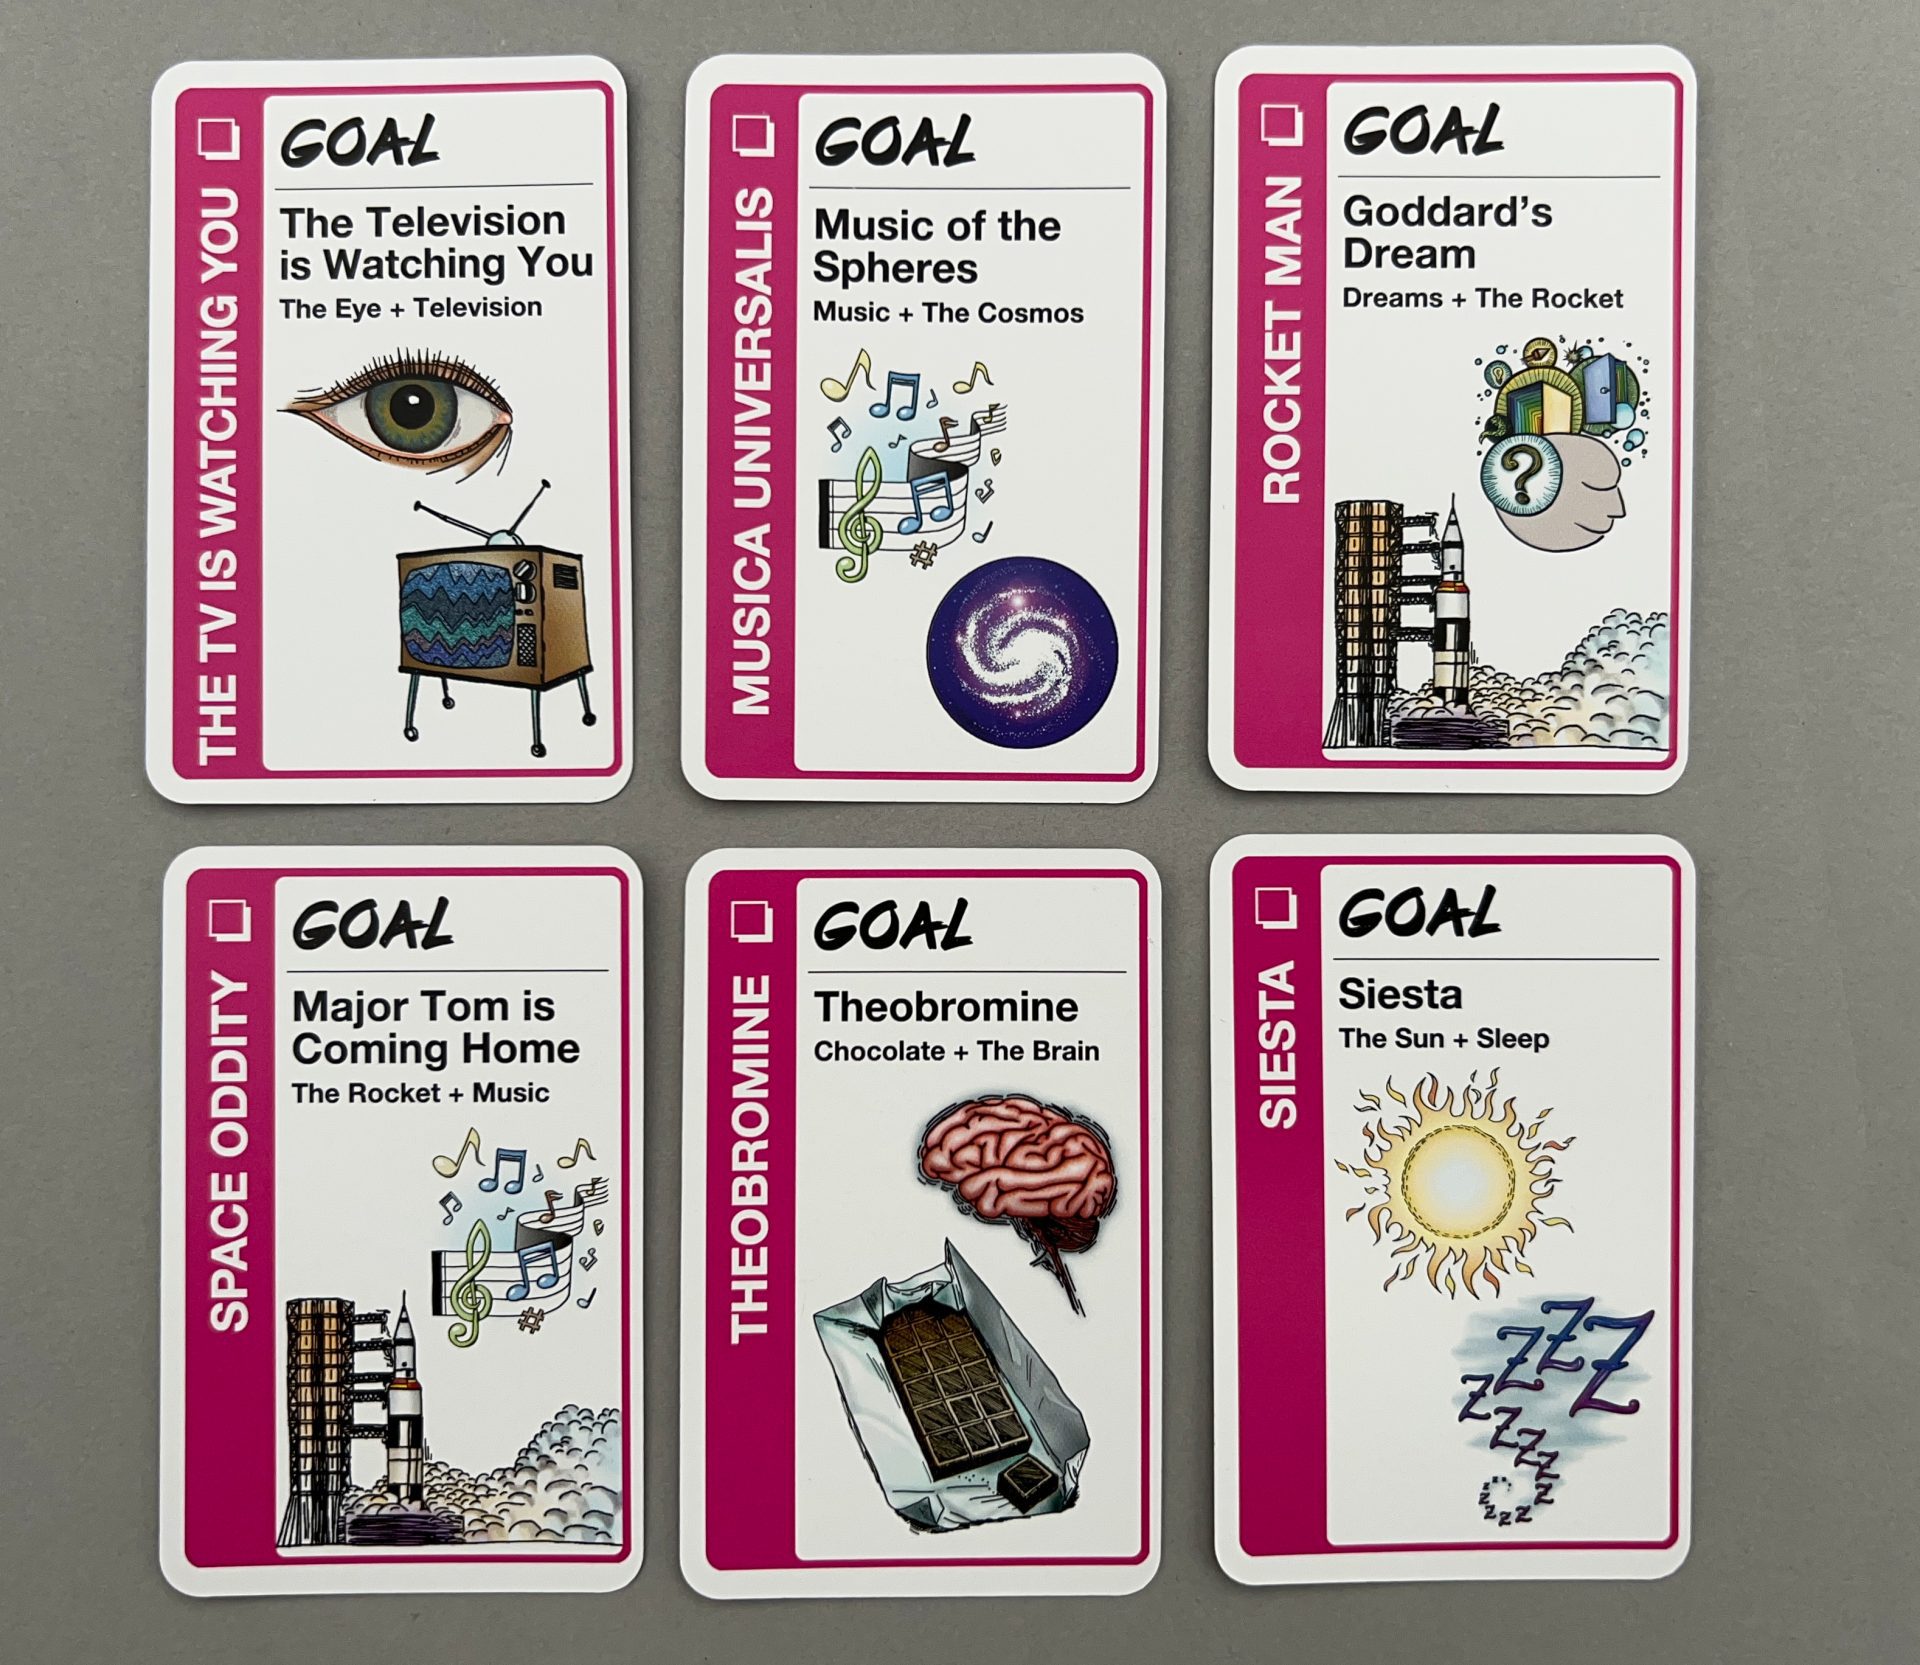 Remixx Goals. (Note the Goddard’s Dream card. That’s a nod to the Goddard Space Flight Center in Greenbelt, MD where Andy and Kristin Looney first met years ago.)